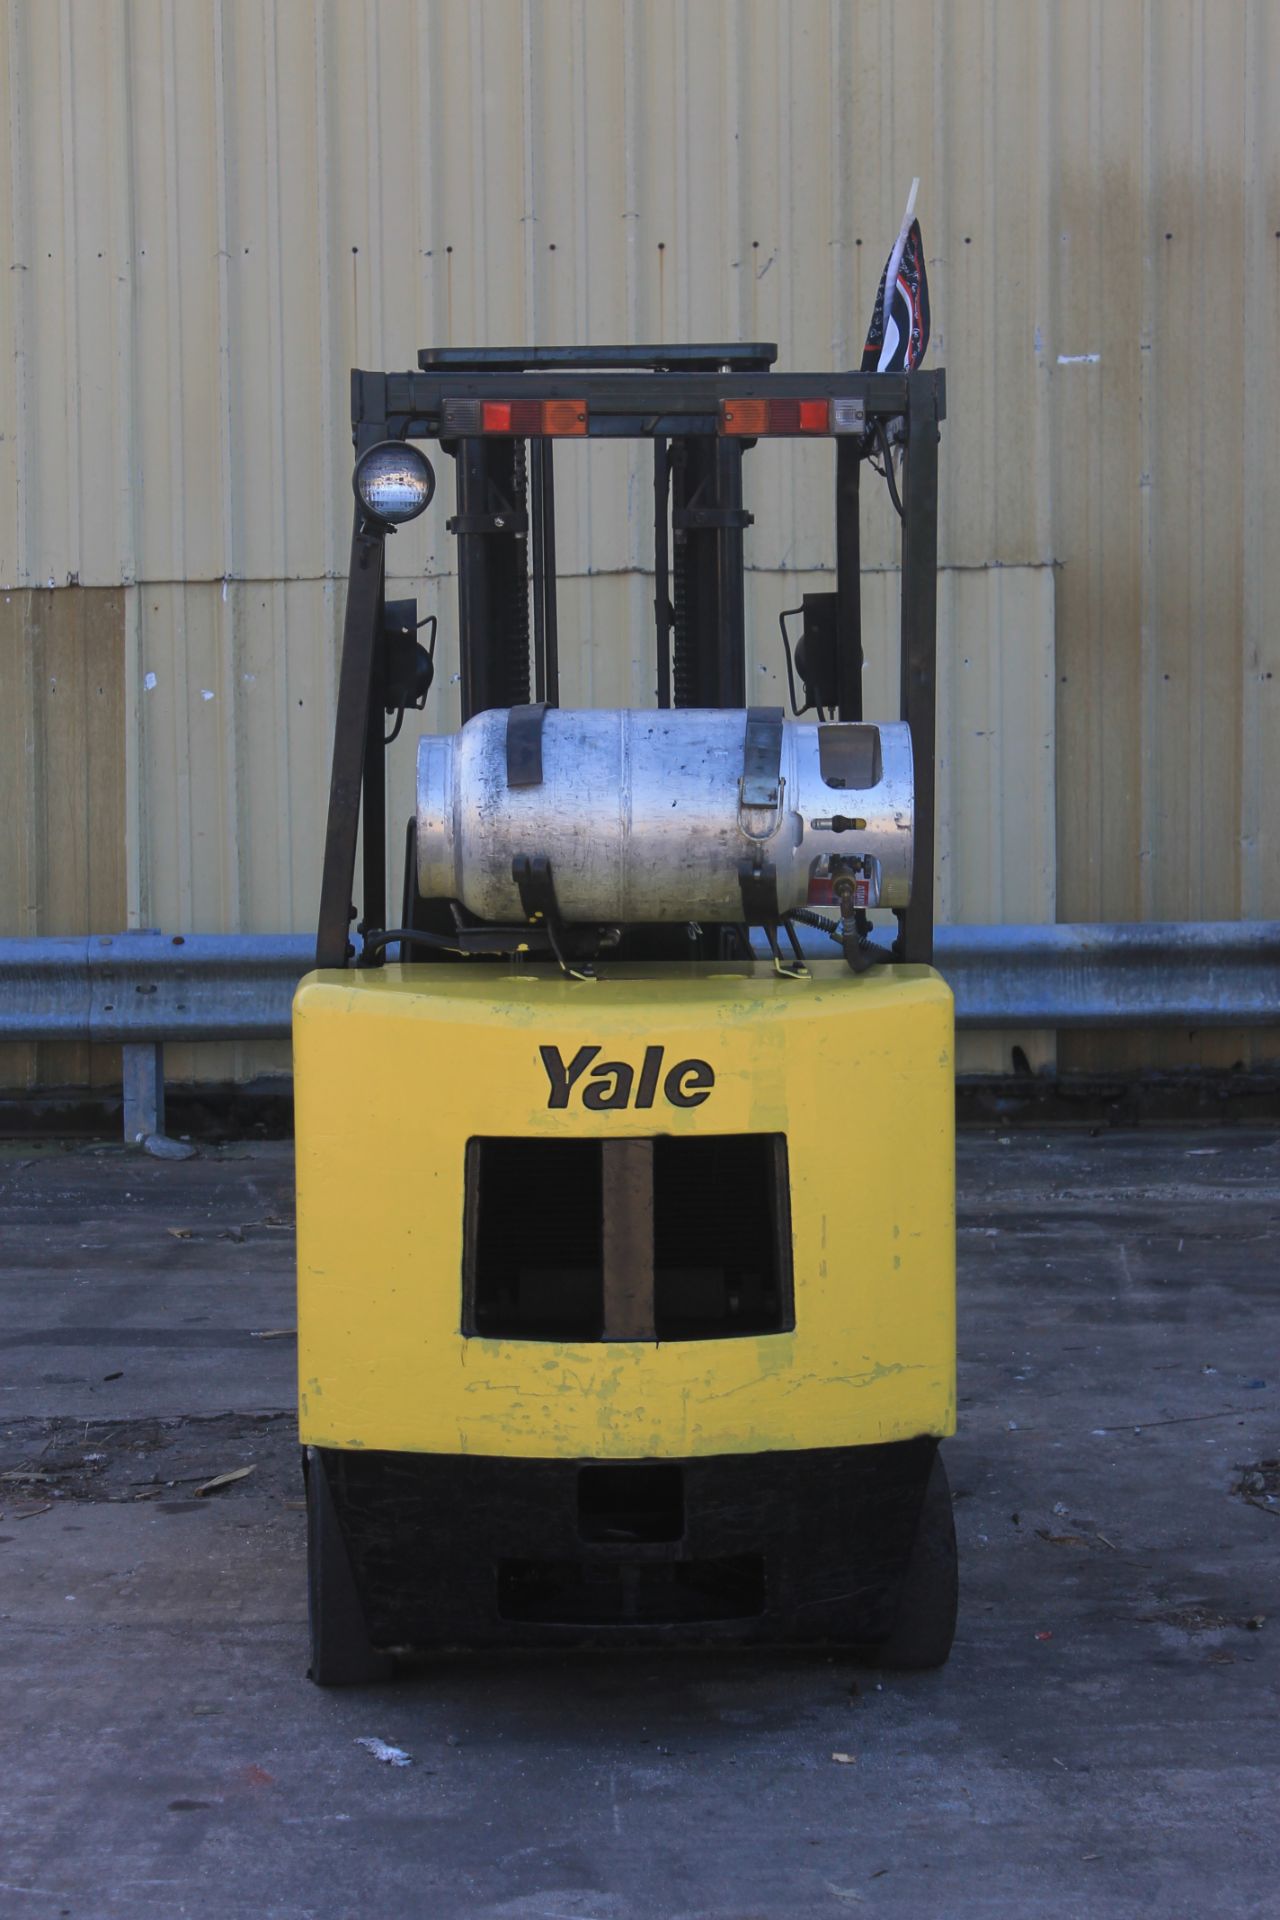 1991 YALE PROPANE FORKLIFT 4000 CAPACITY, 6340 HRS (WATCH VIDEO) - Image 4 of 6